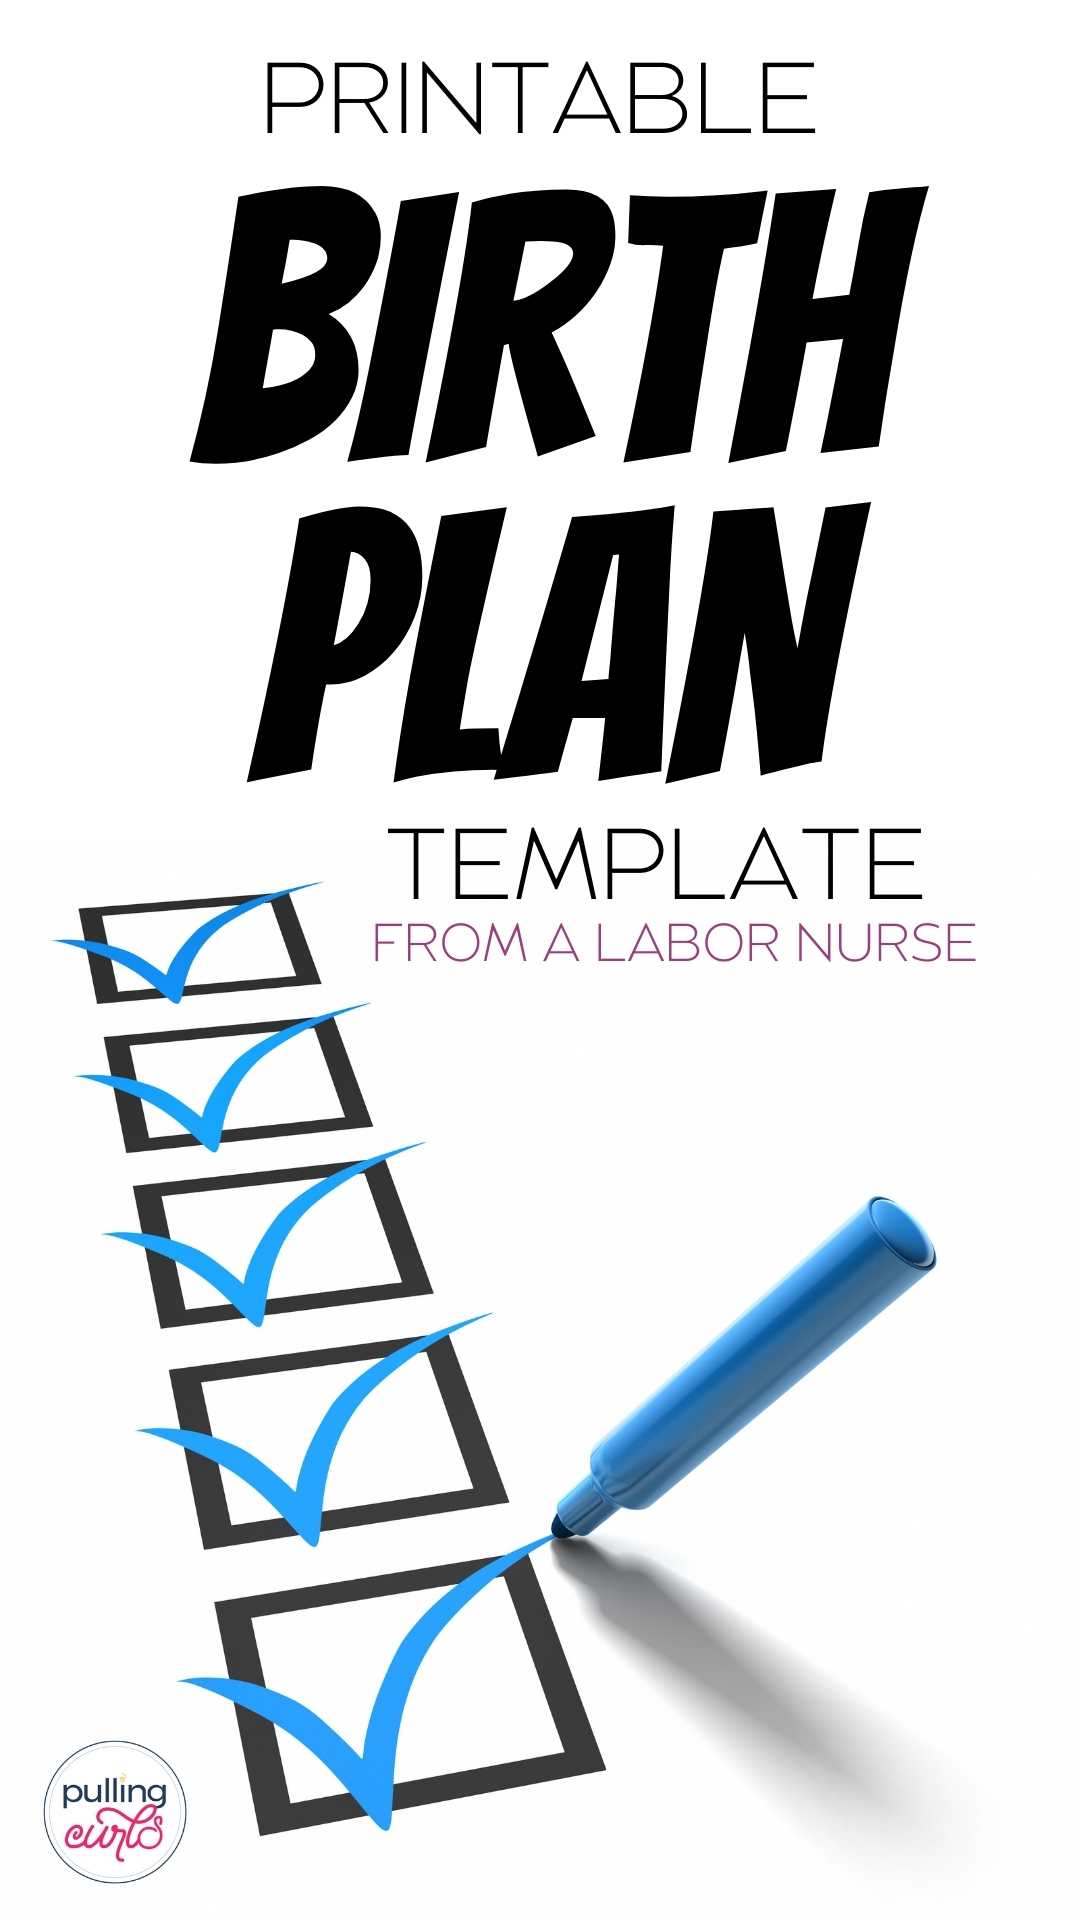 This printable fill-in-the-blank birth plan template will help you communicate with the medical team what support you would like. It is a good idea to avoid misunderstanding by spelling out in advance your customized birth plan. Your doctor, midwife, nurse, doula birthing center or hospital will really appreciate it! via @pullingcurls